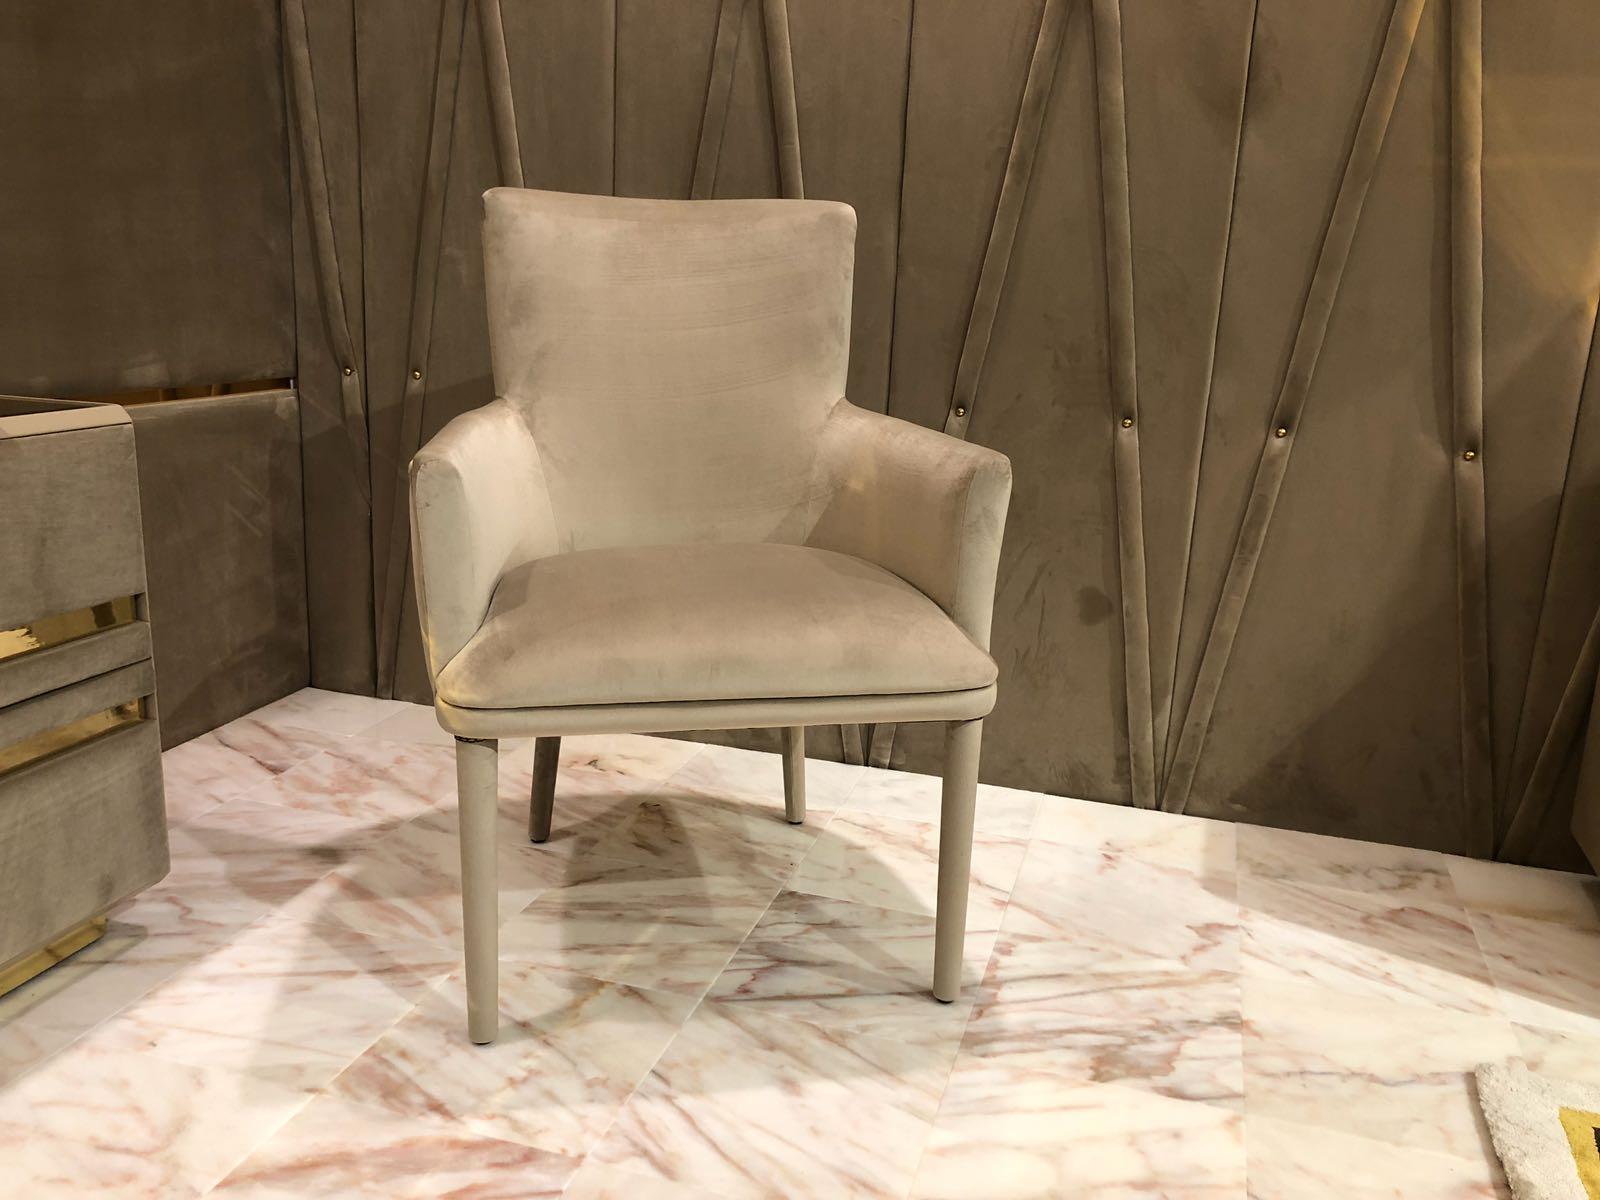 The contemporary upholstered designer occasional chair is an example of charming beauty, original and ornate. Casual chic style, with or without stud detailing as shown. Exquisitely opulent, a small armchair that would suit both a classic and